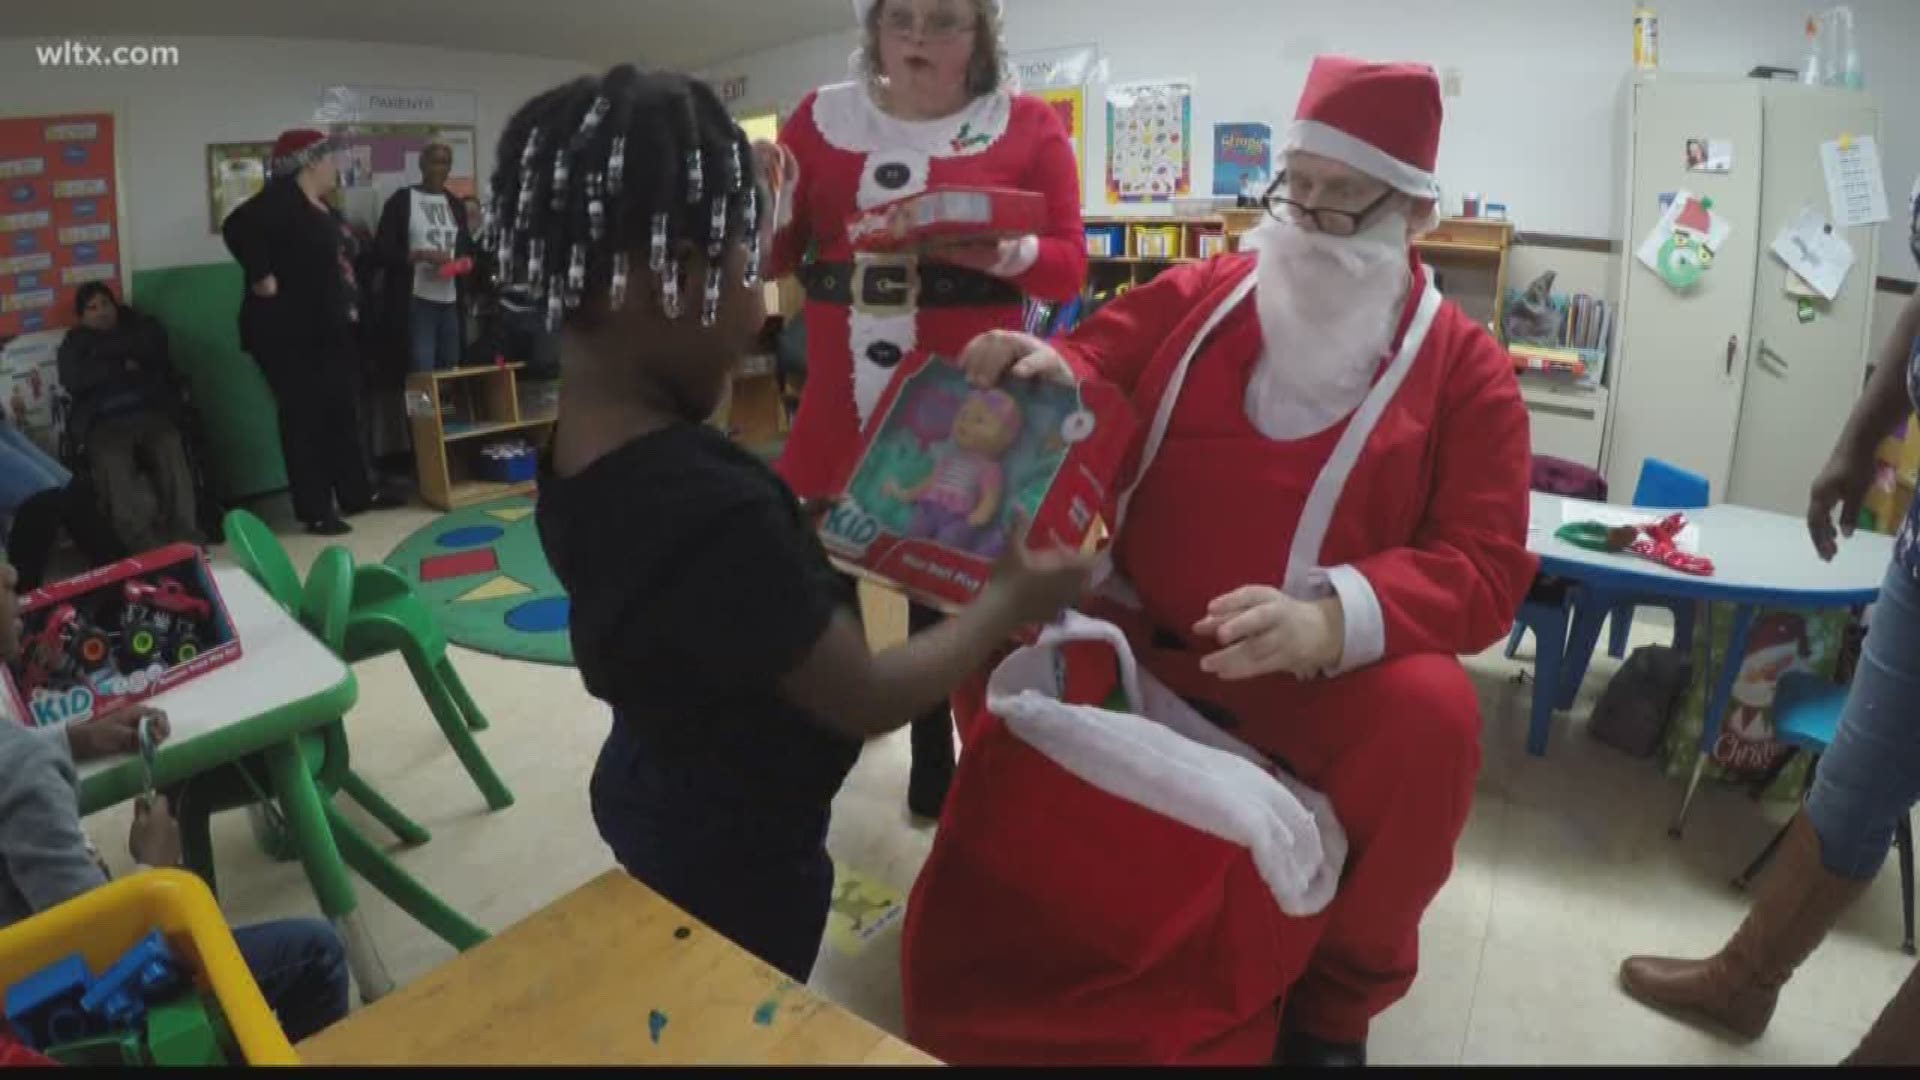 One group of Midlands adults with disabilities are giving to kids for the holiday season.